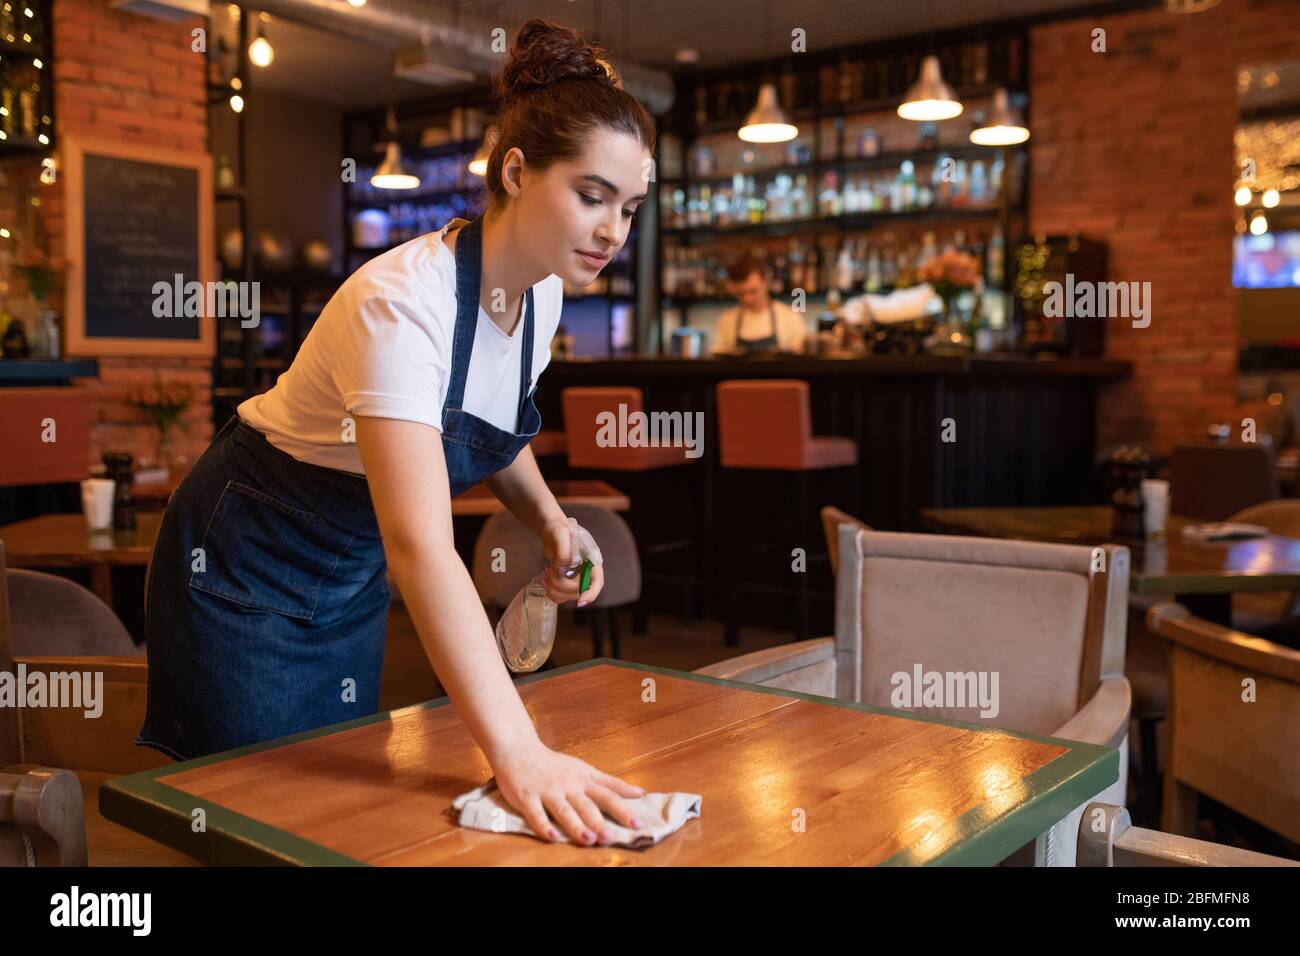 Pretty young waitress in apron bending over wooden table while using detergent and duster to clean it for new guests of restaurant Stock Photo